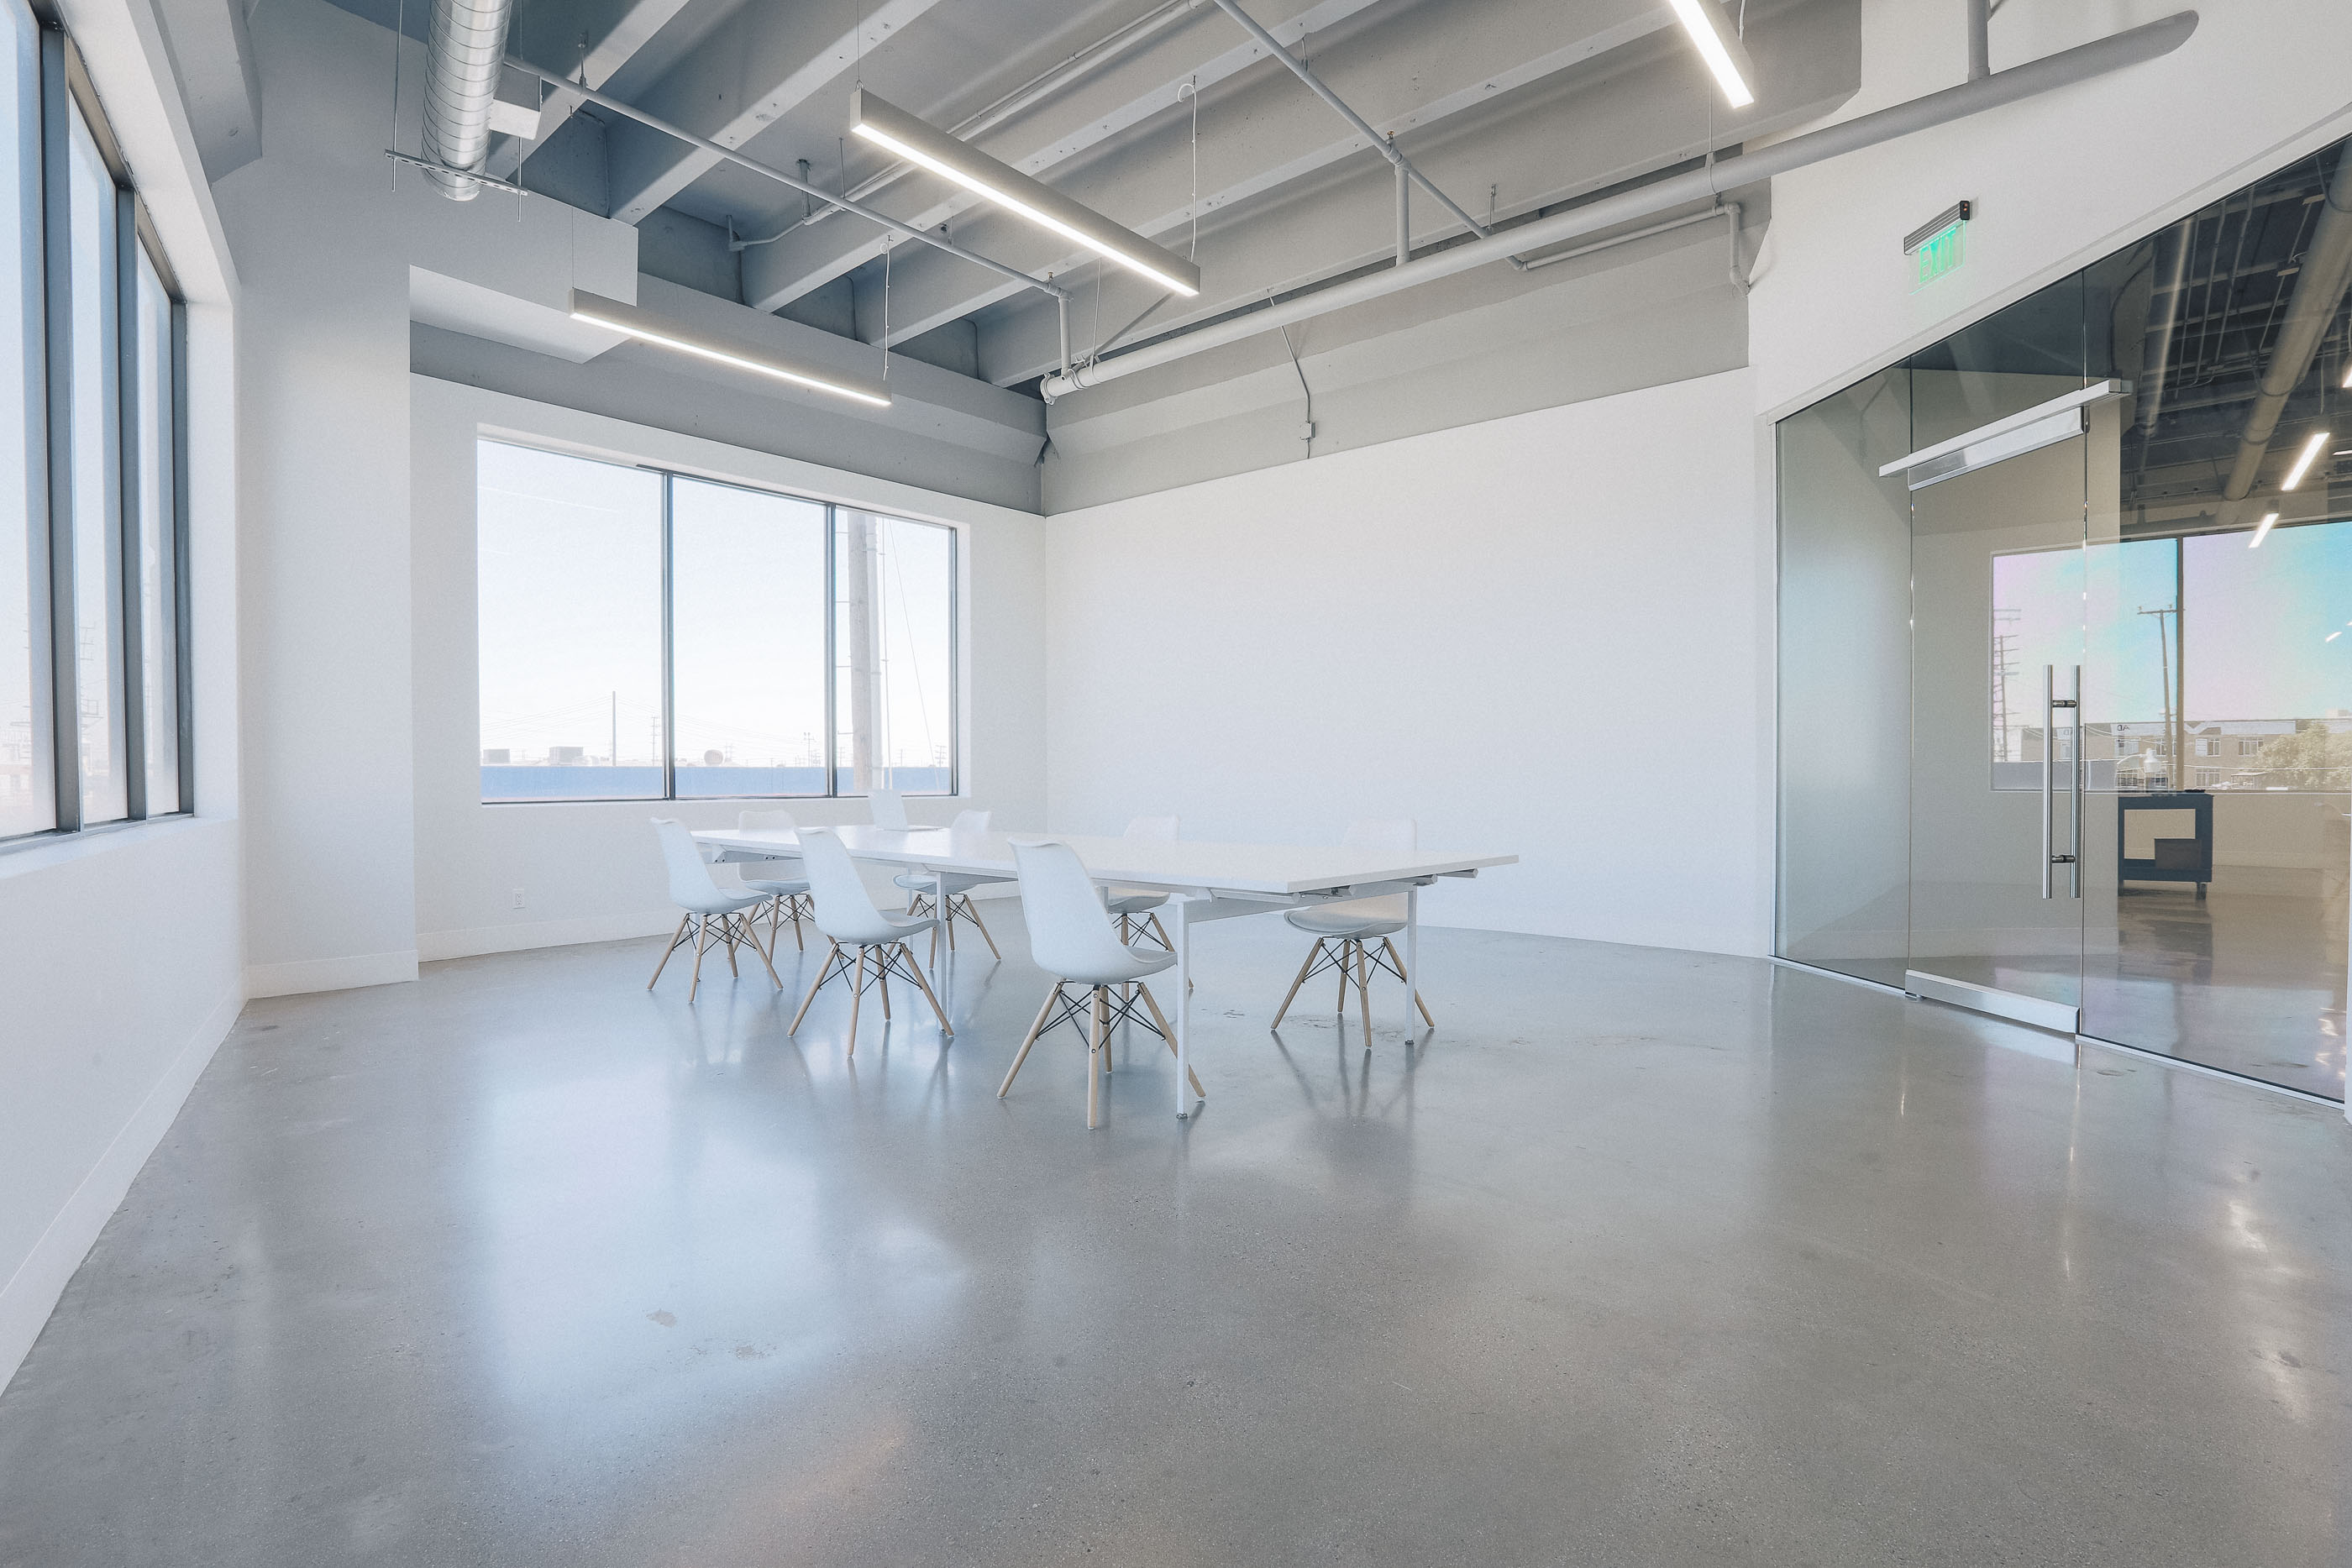  A multi-functional space in downtown Los Angeles